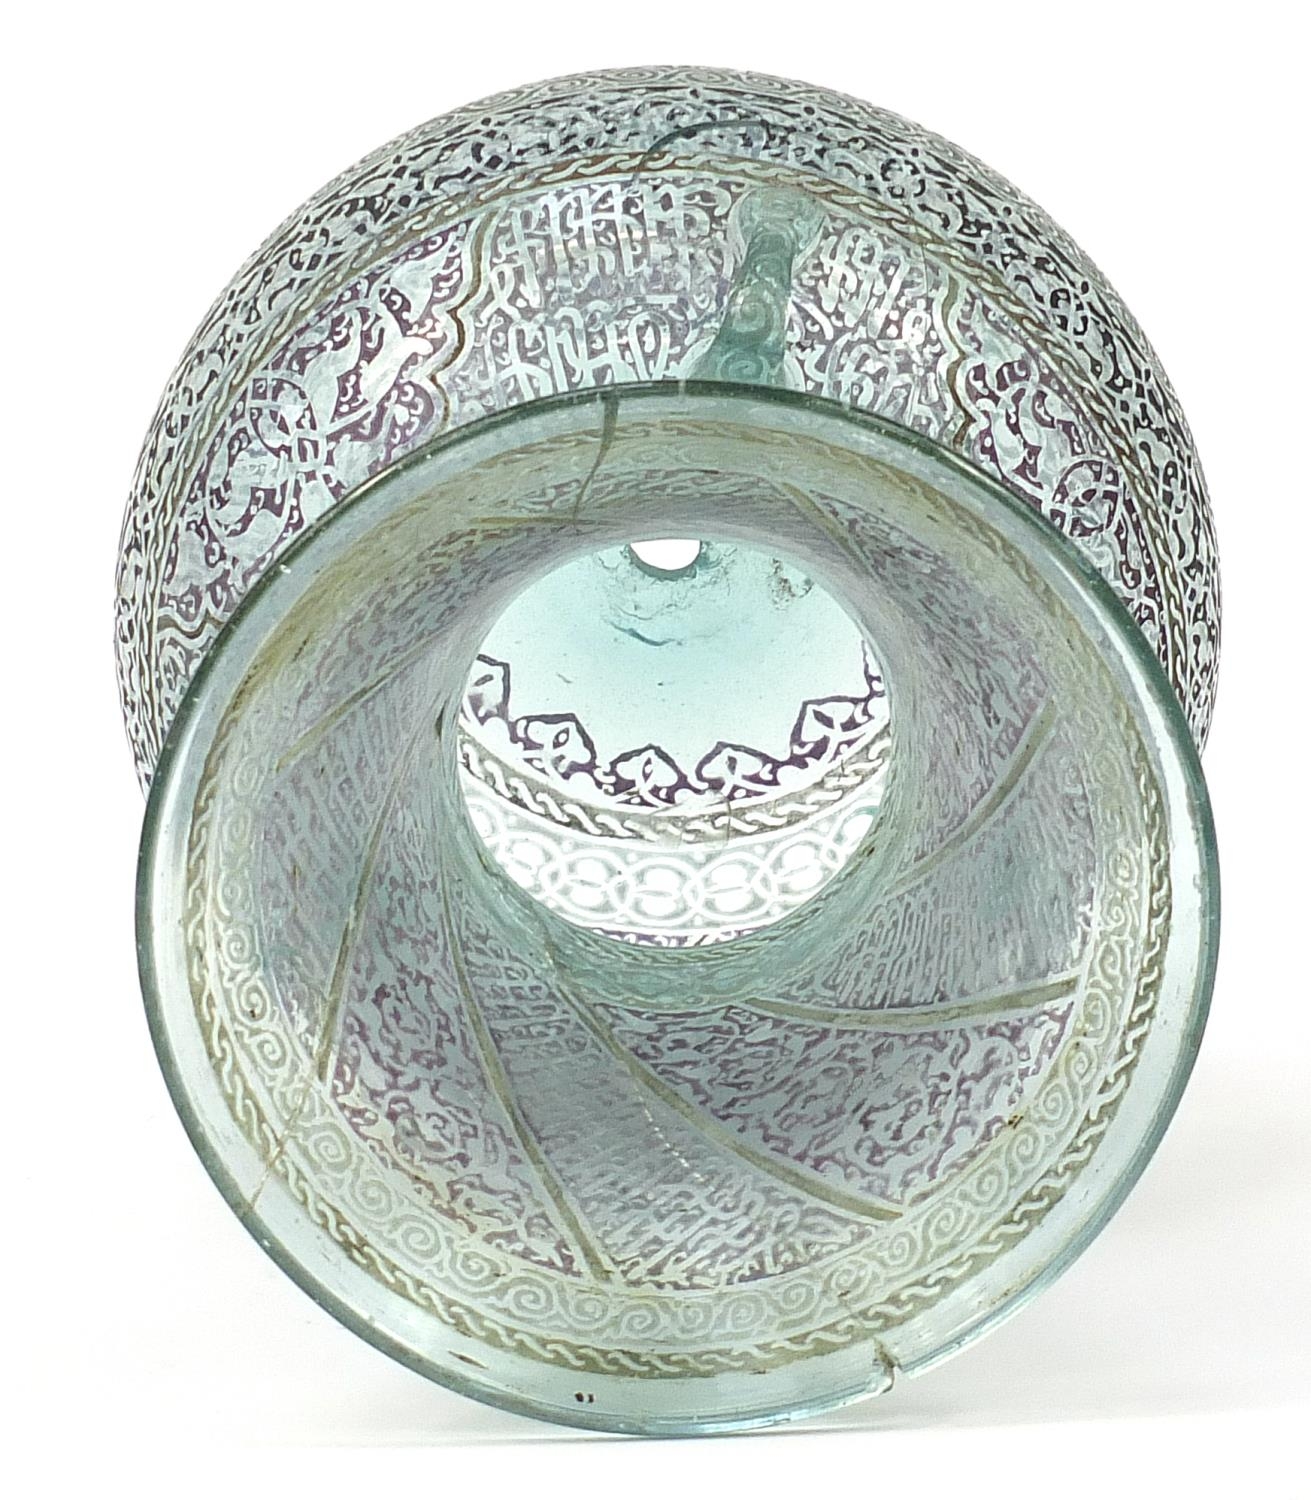 Antique Islamic Mamluk Revival glass mosque lantern engraved with calligraphy and flowers, 31.5cm - Image 3 of 4